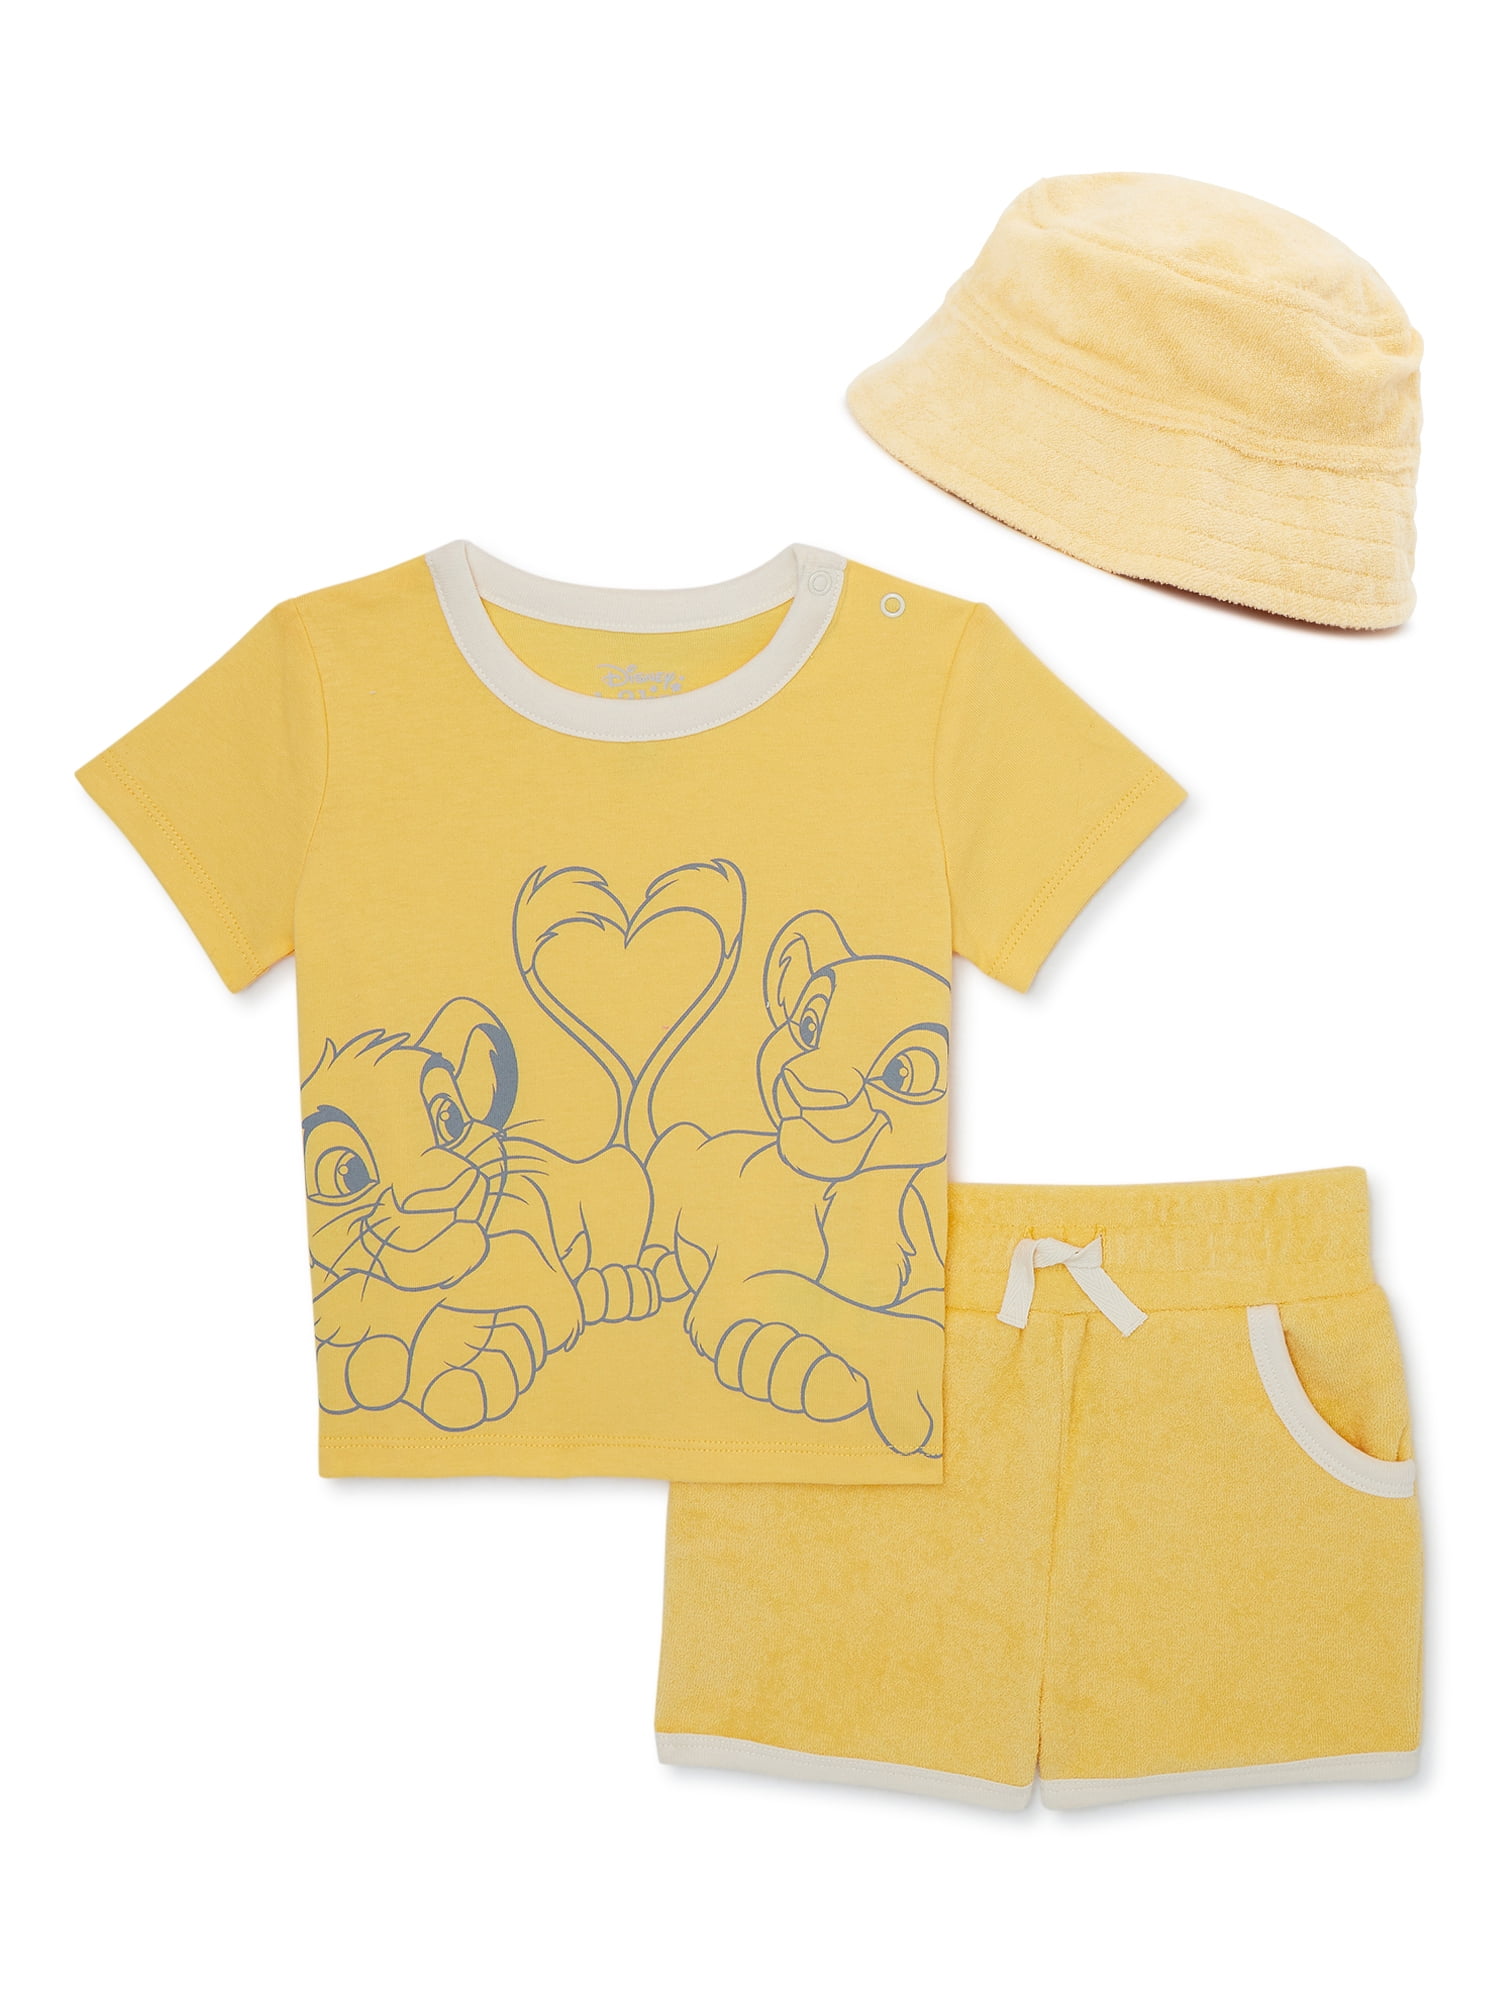 The Lion King Baby Boys Terry Outfit Set, 3-Piece, Sizes 0-24 Months